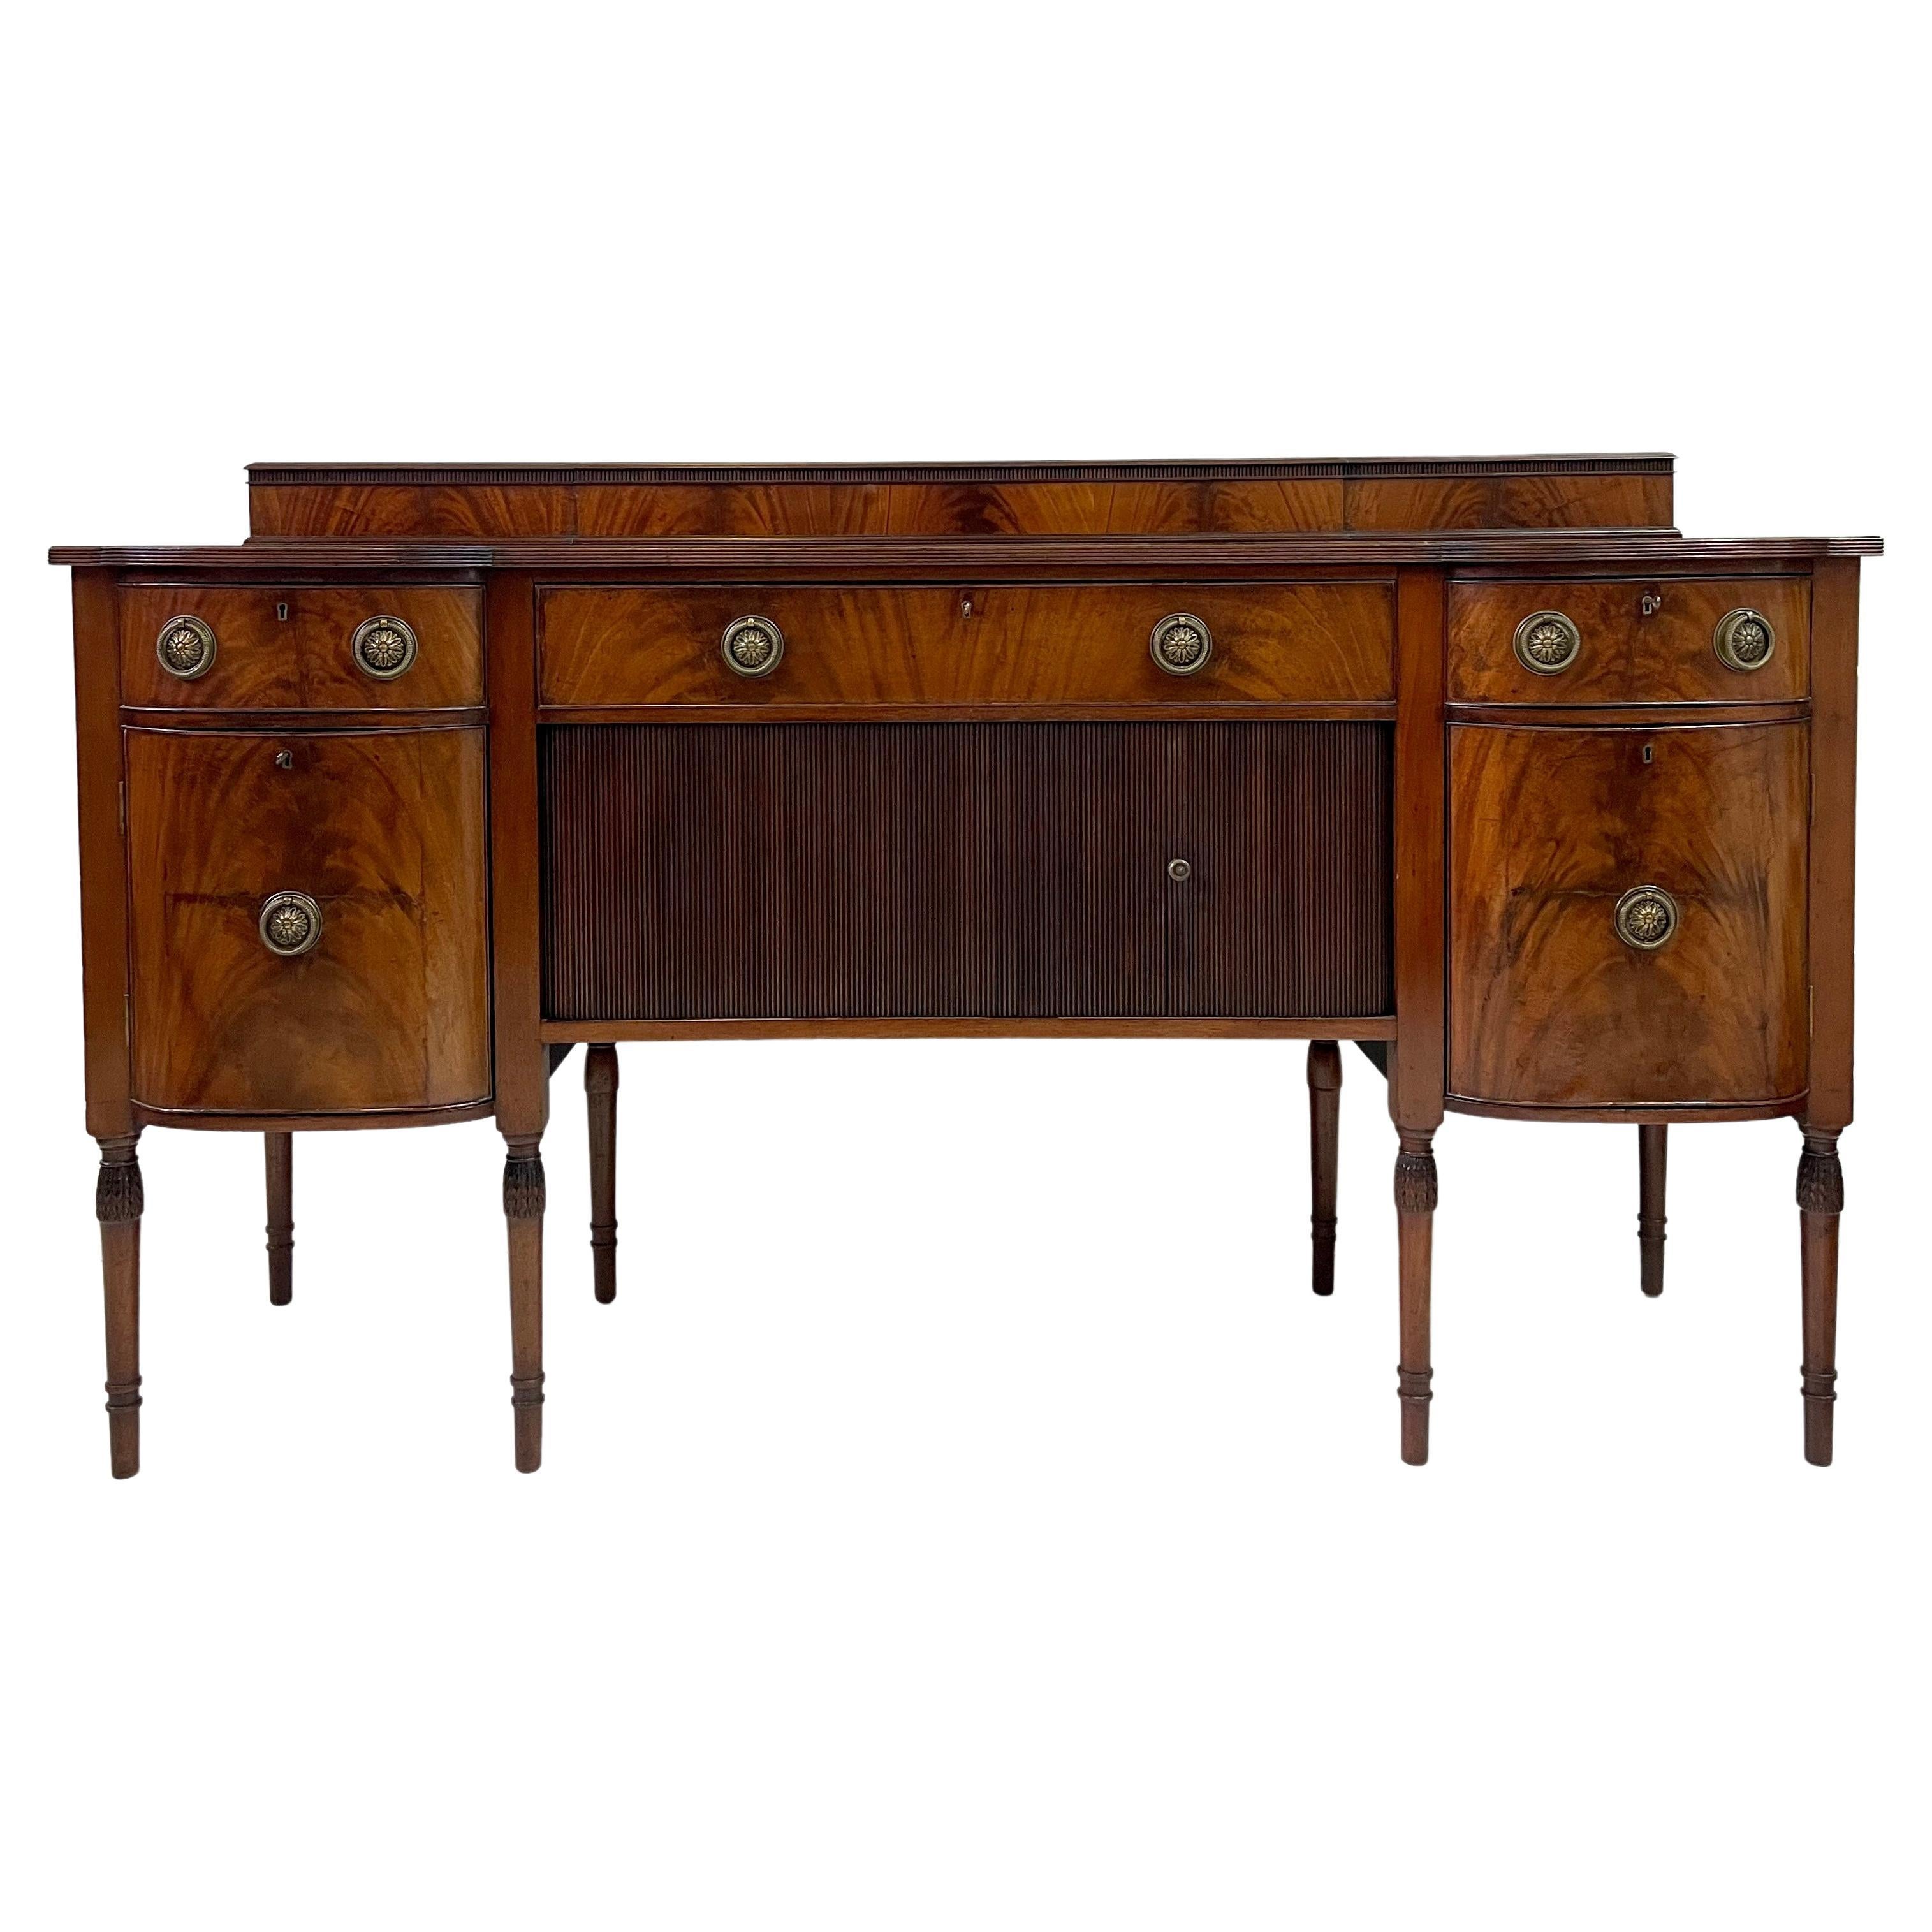 Exceptional English Mahogany Sideboard For Sale